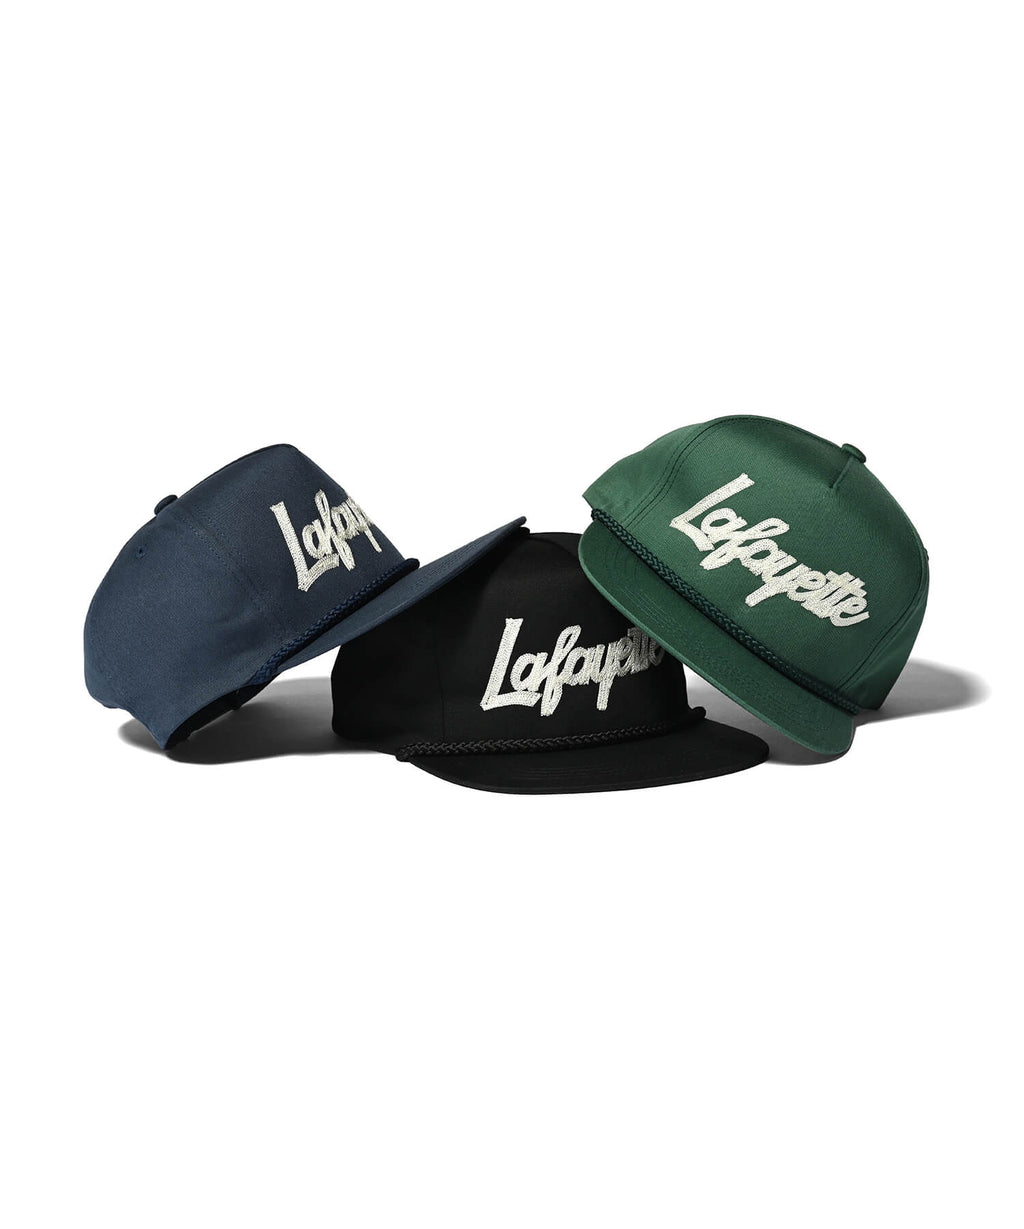 Online shopping for HATS | LFYT OFFICIAL SITE – Page 2